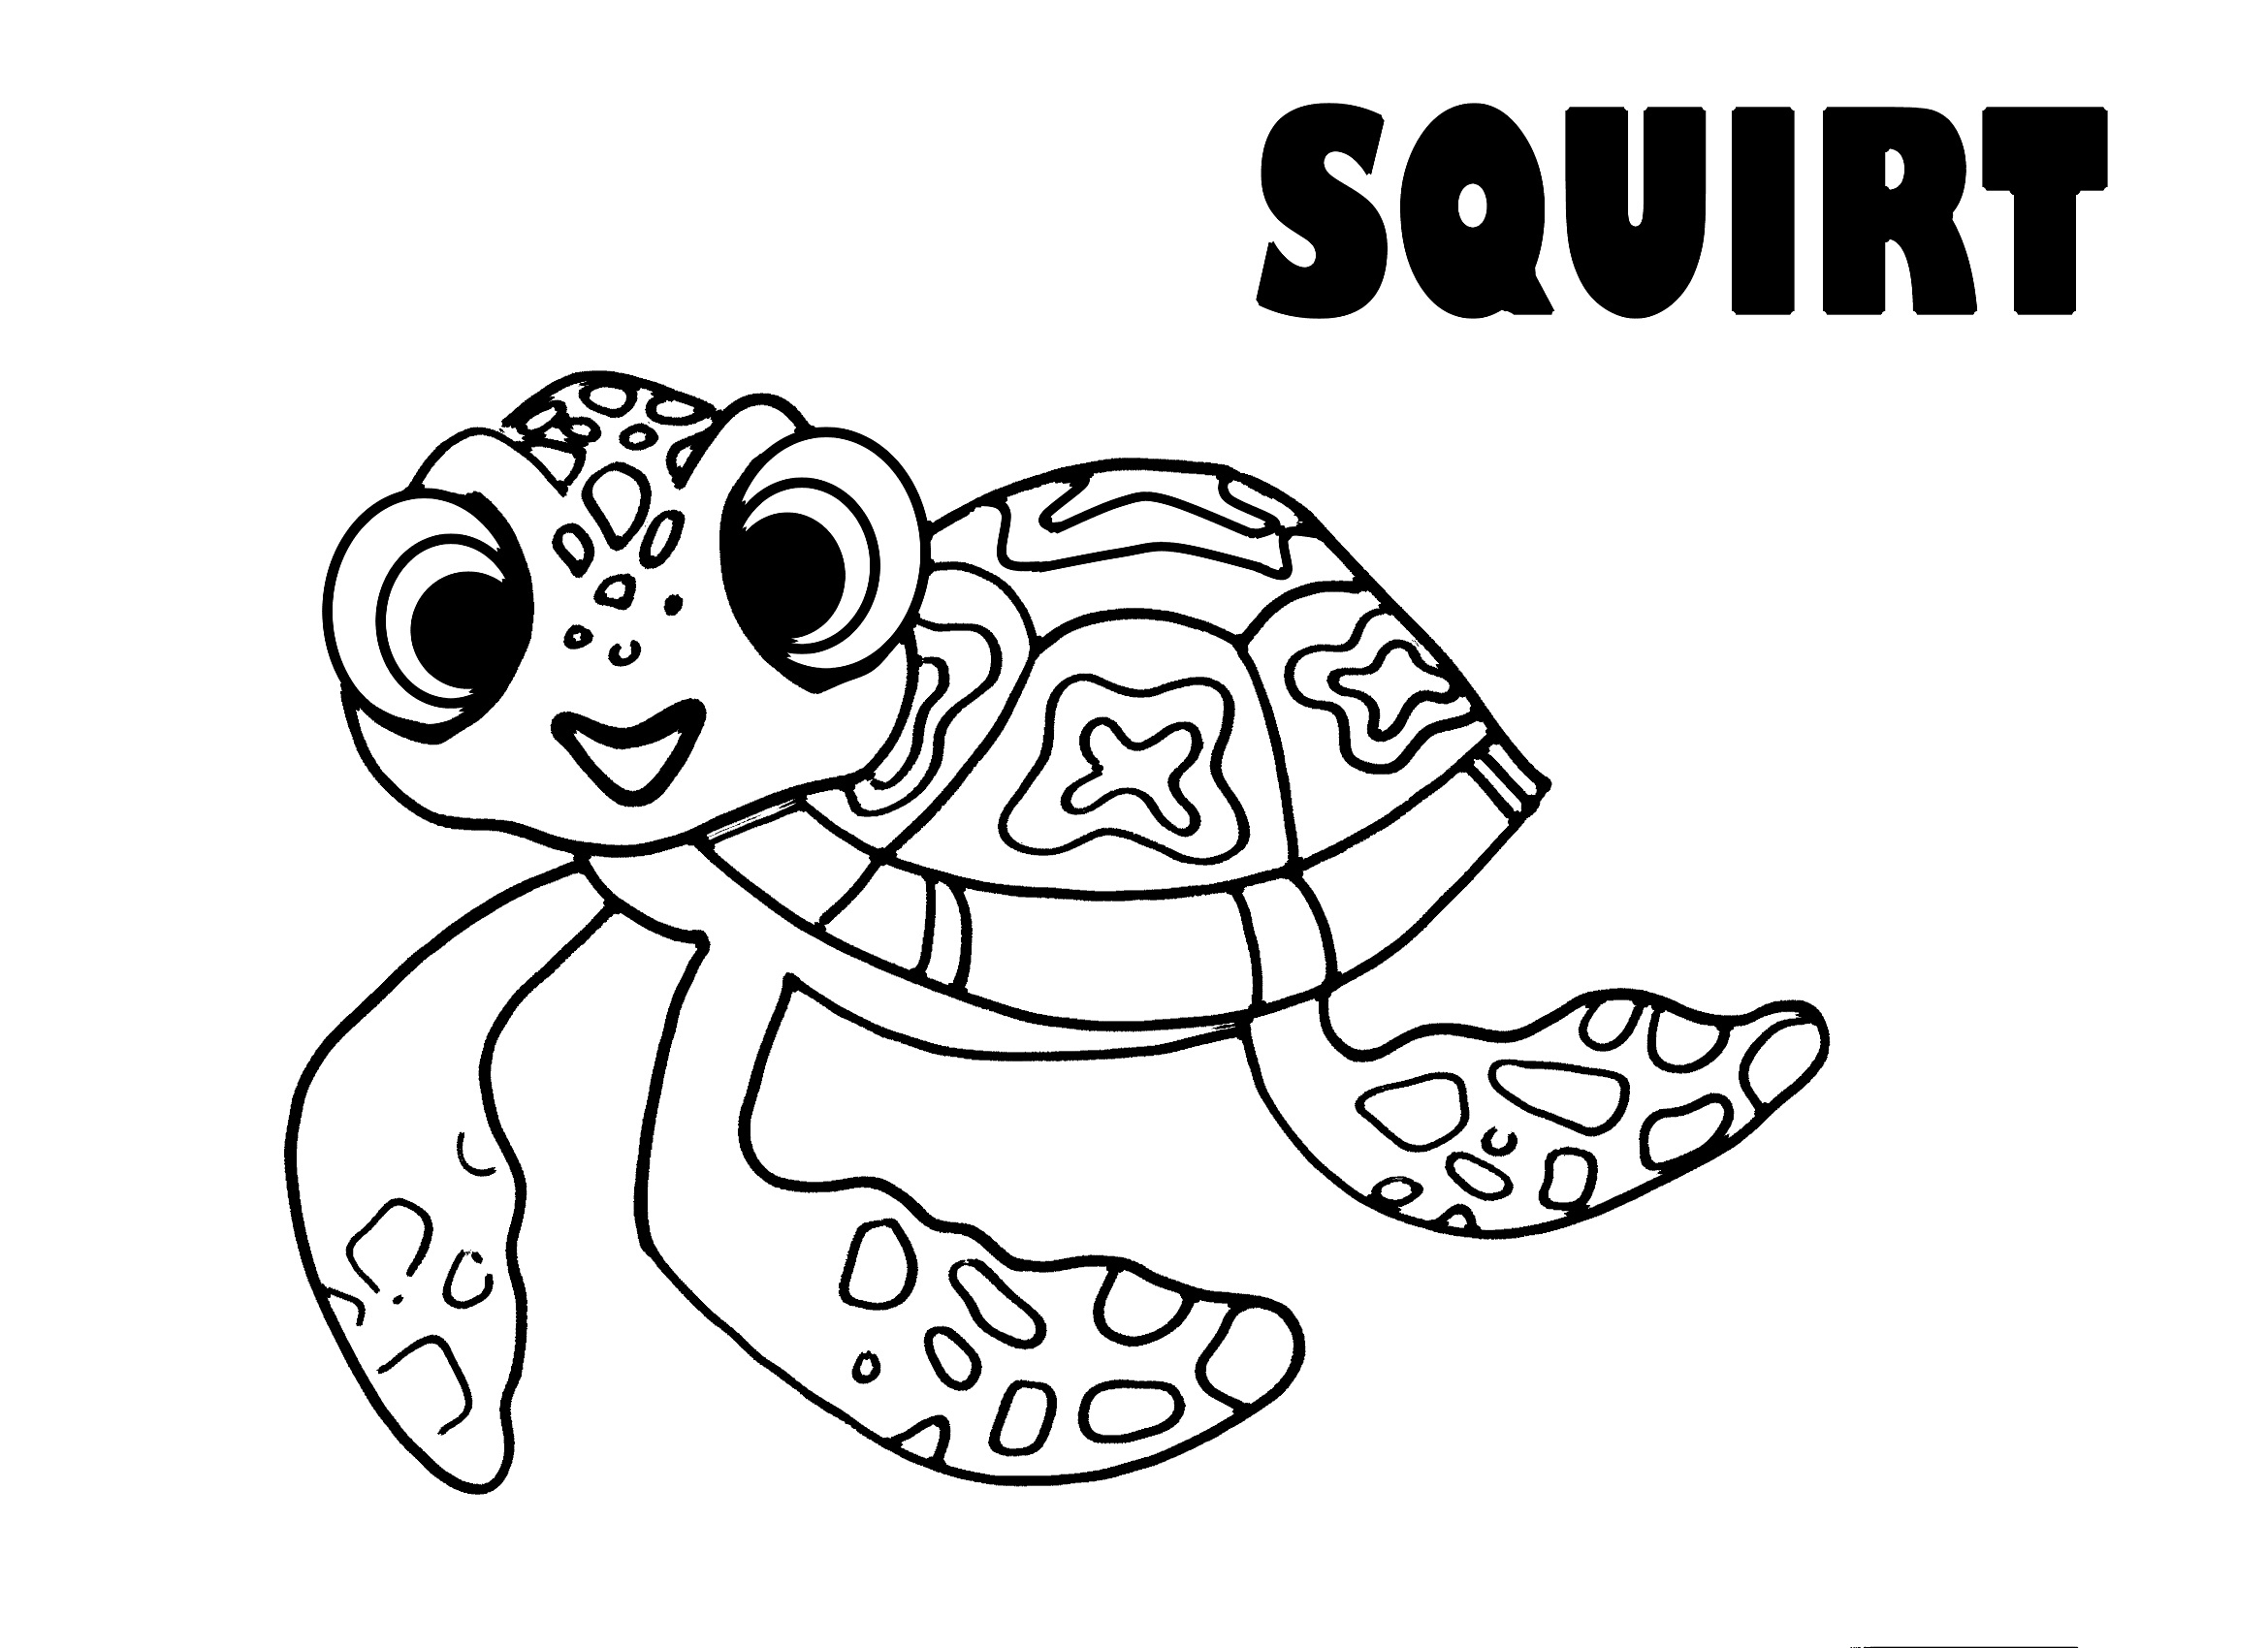 Nemo Printable Coloring Pages